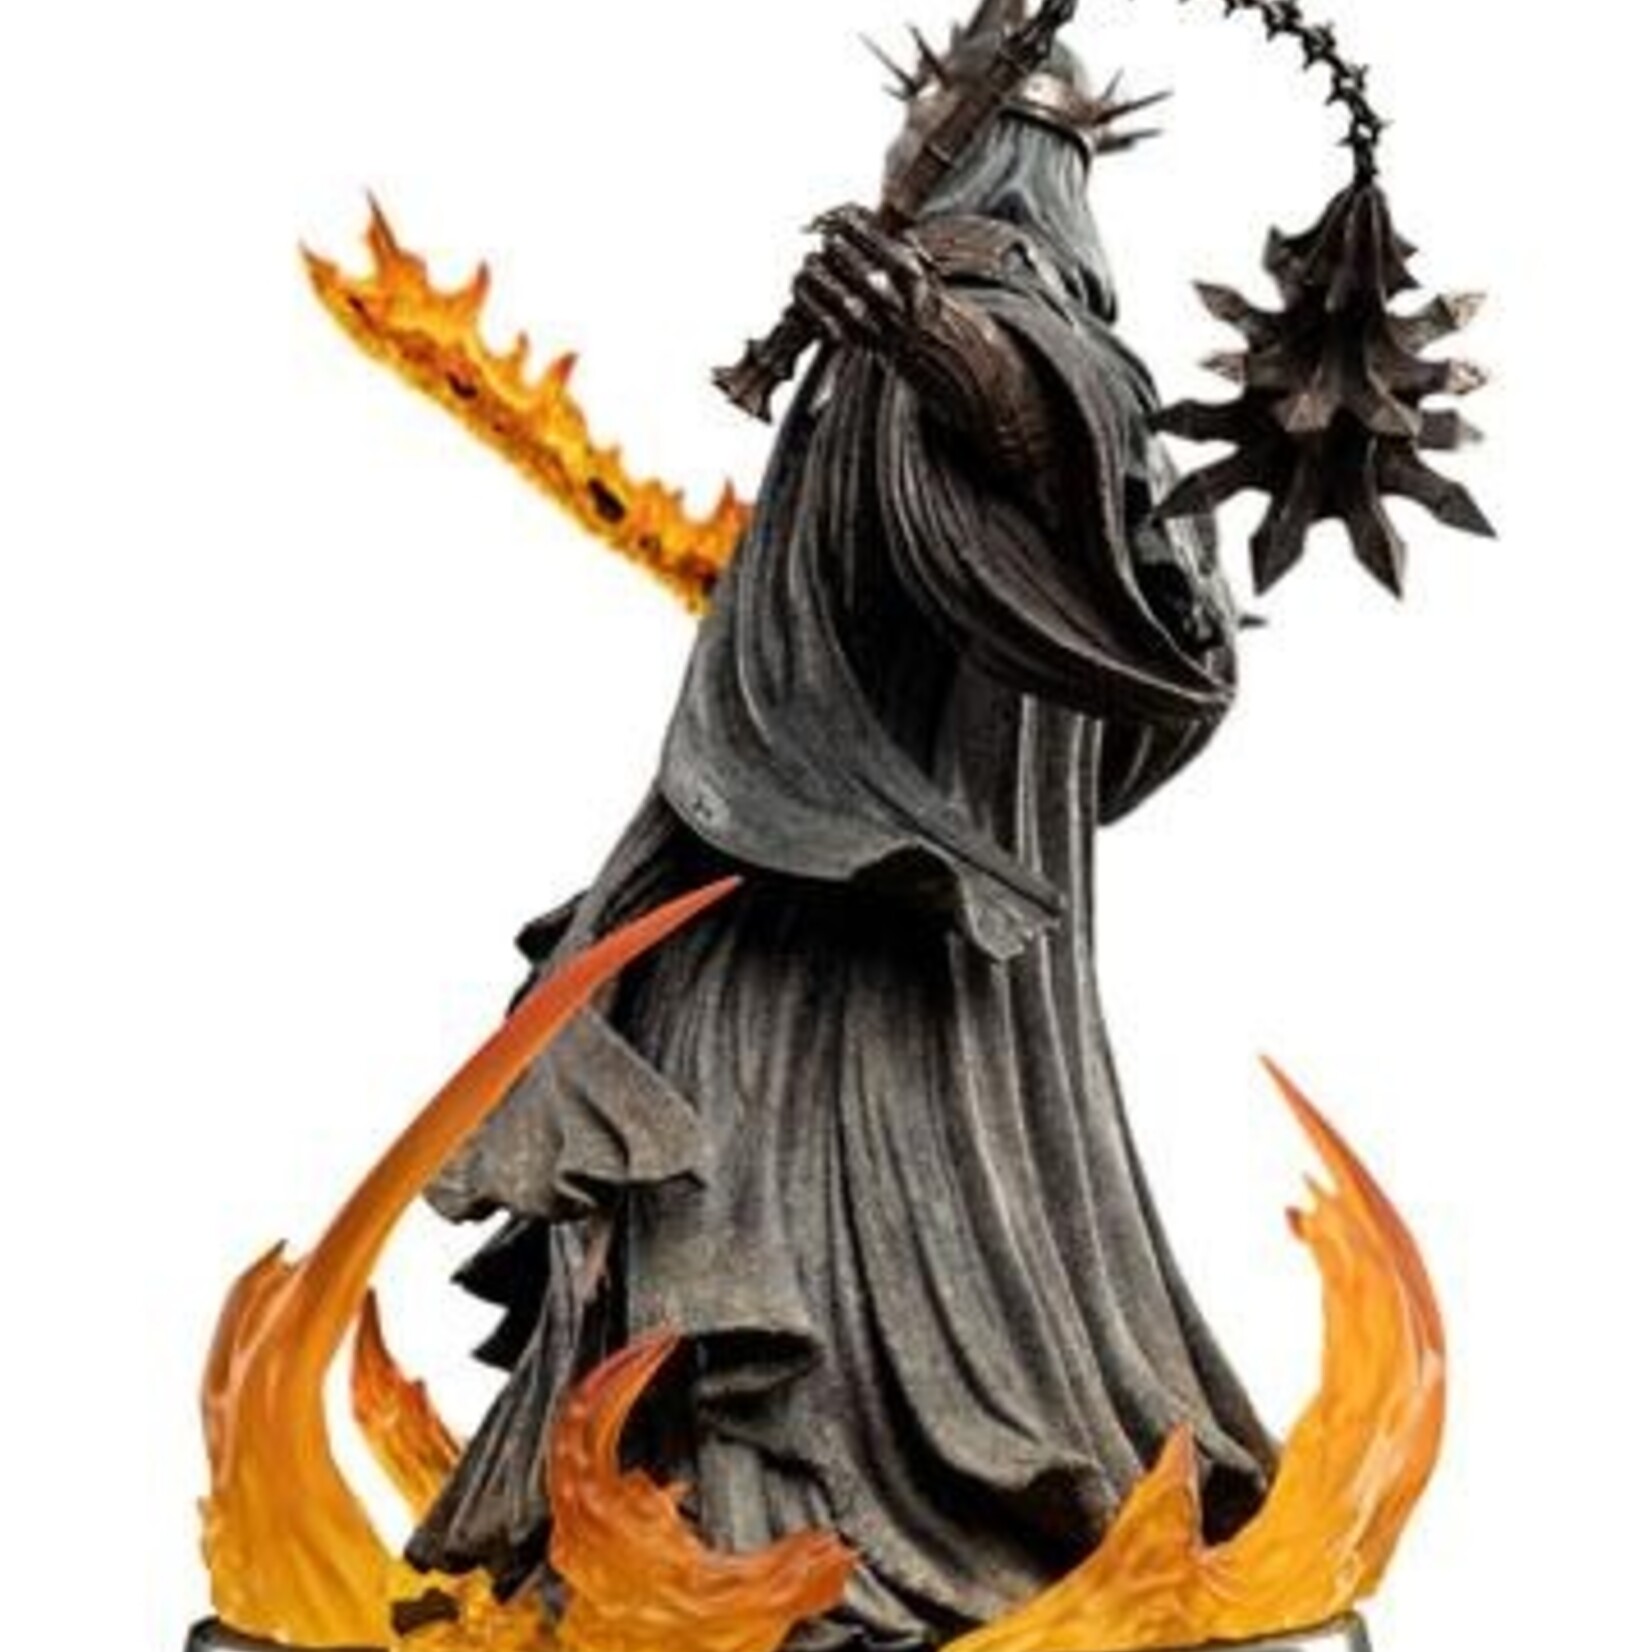 Weta Workshop The Lord of the Rings Figures of Fandom PVC Statue The Witch-king of Angmar 31 cm